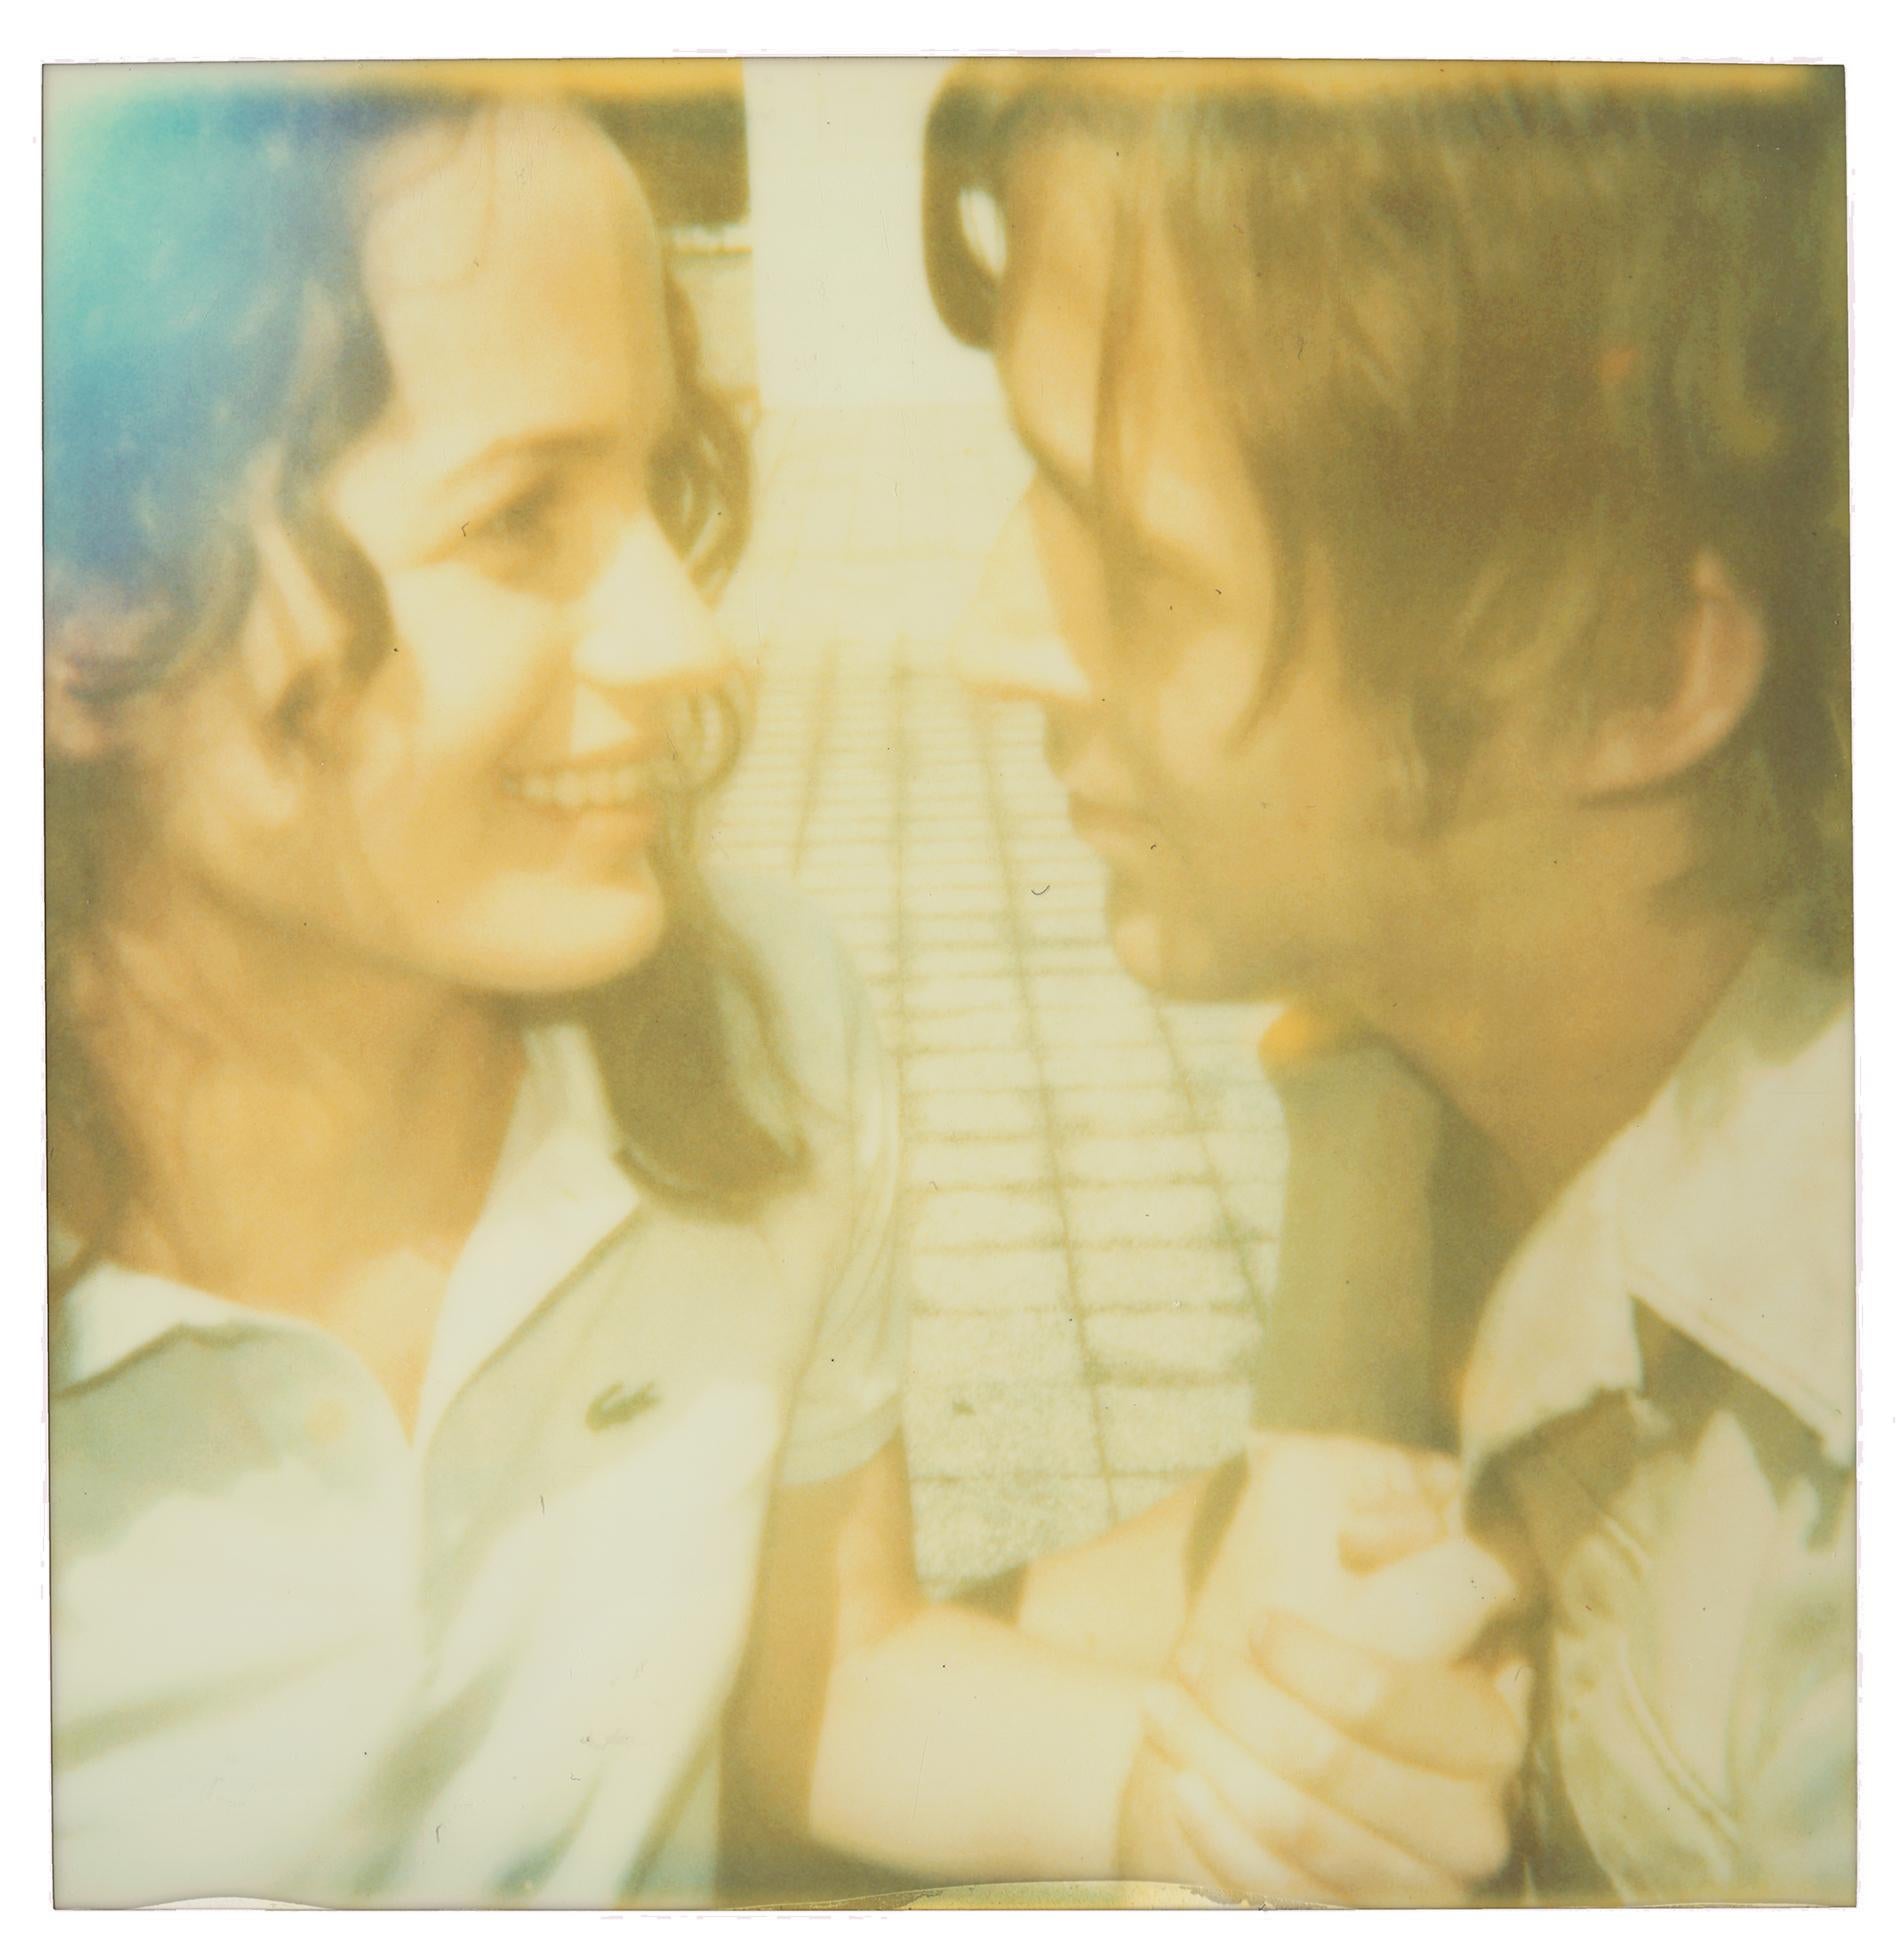 Athena and Henry (Stay) - featuring Ryan Gosling and Elizabeth Reaser